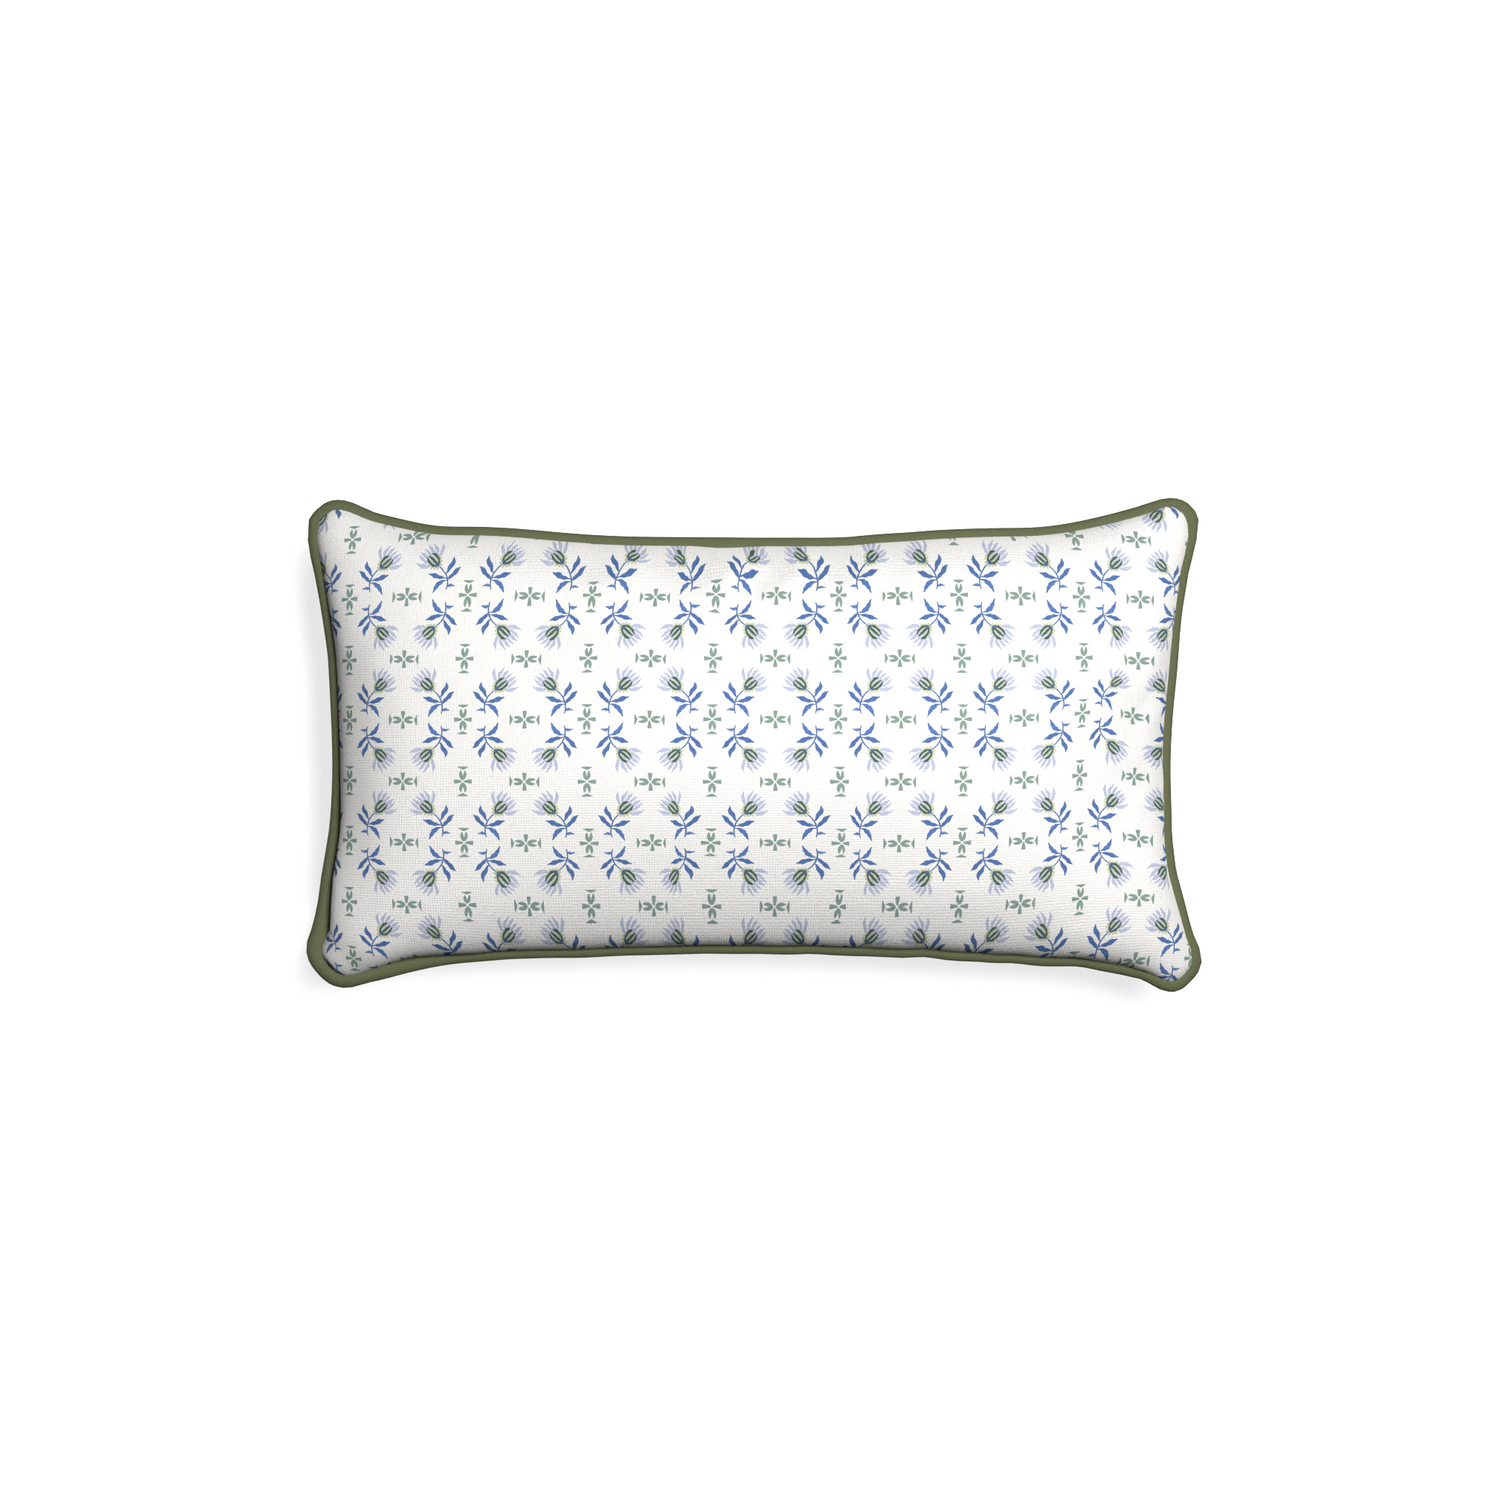 Petite-lumbar lee custom blue & green floralpillow with f piping on white background